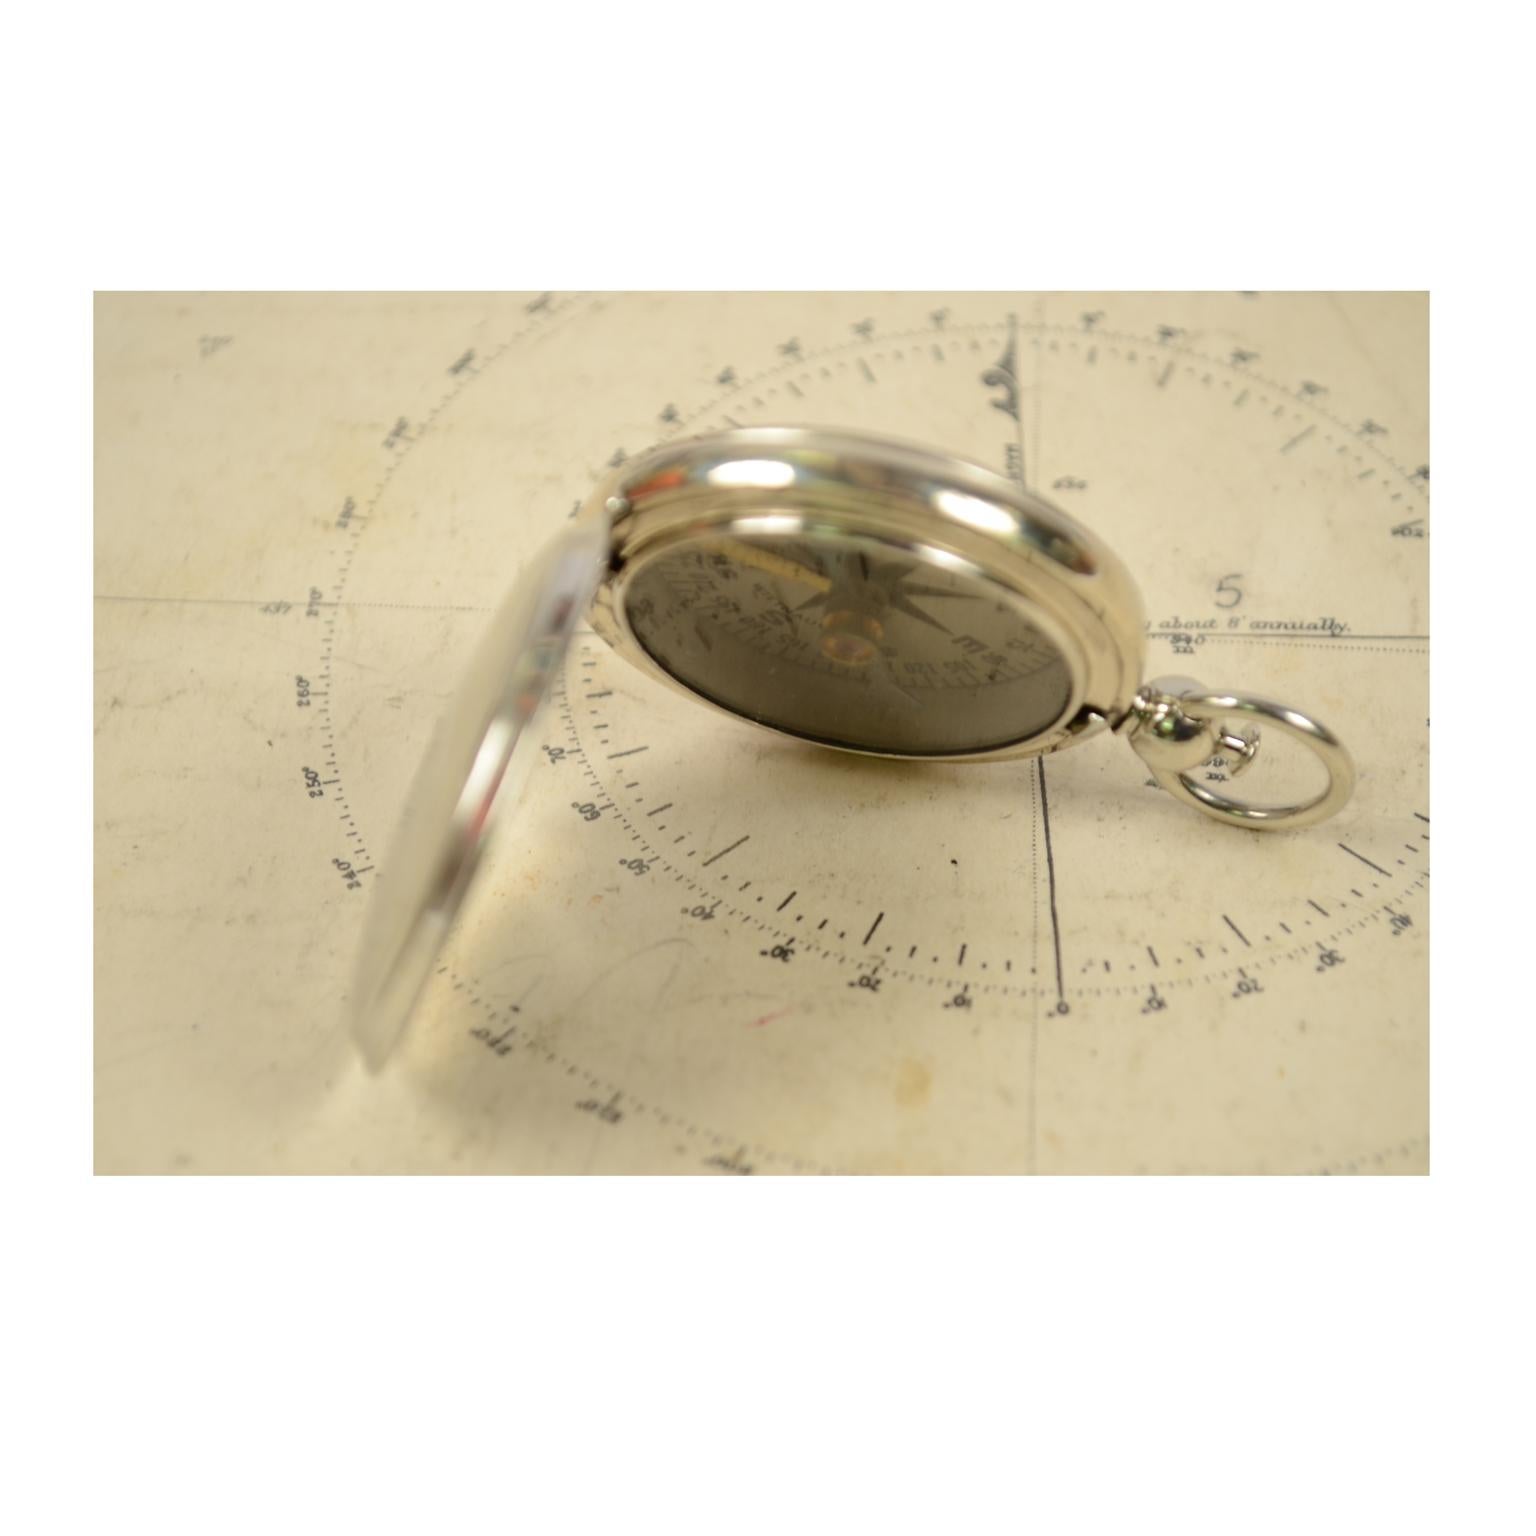 Compass Used by the American Aviation Officers in the 1920s Signed Wittnauer 1